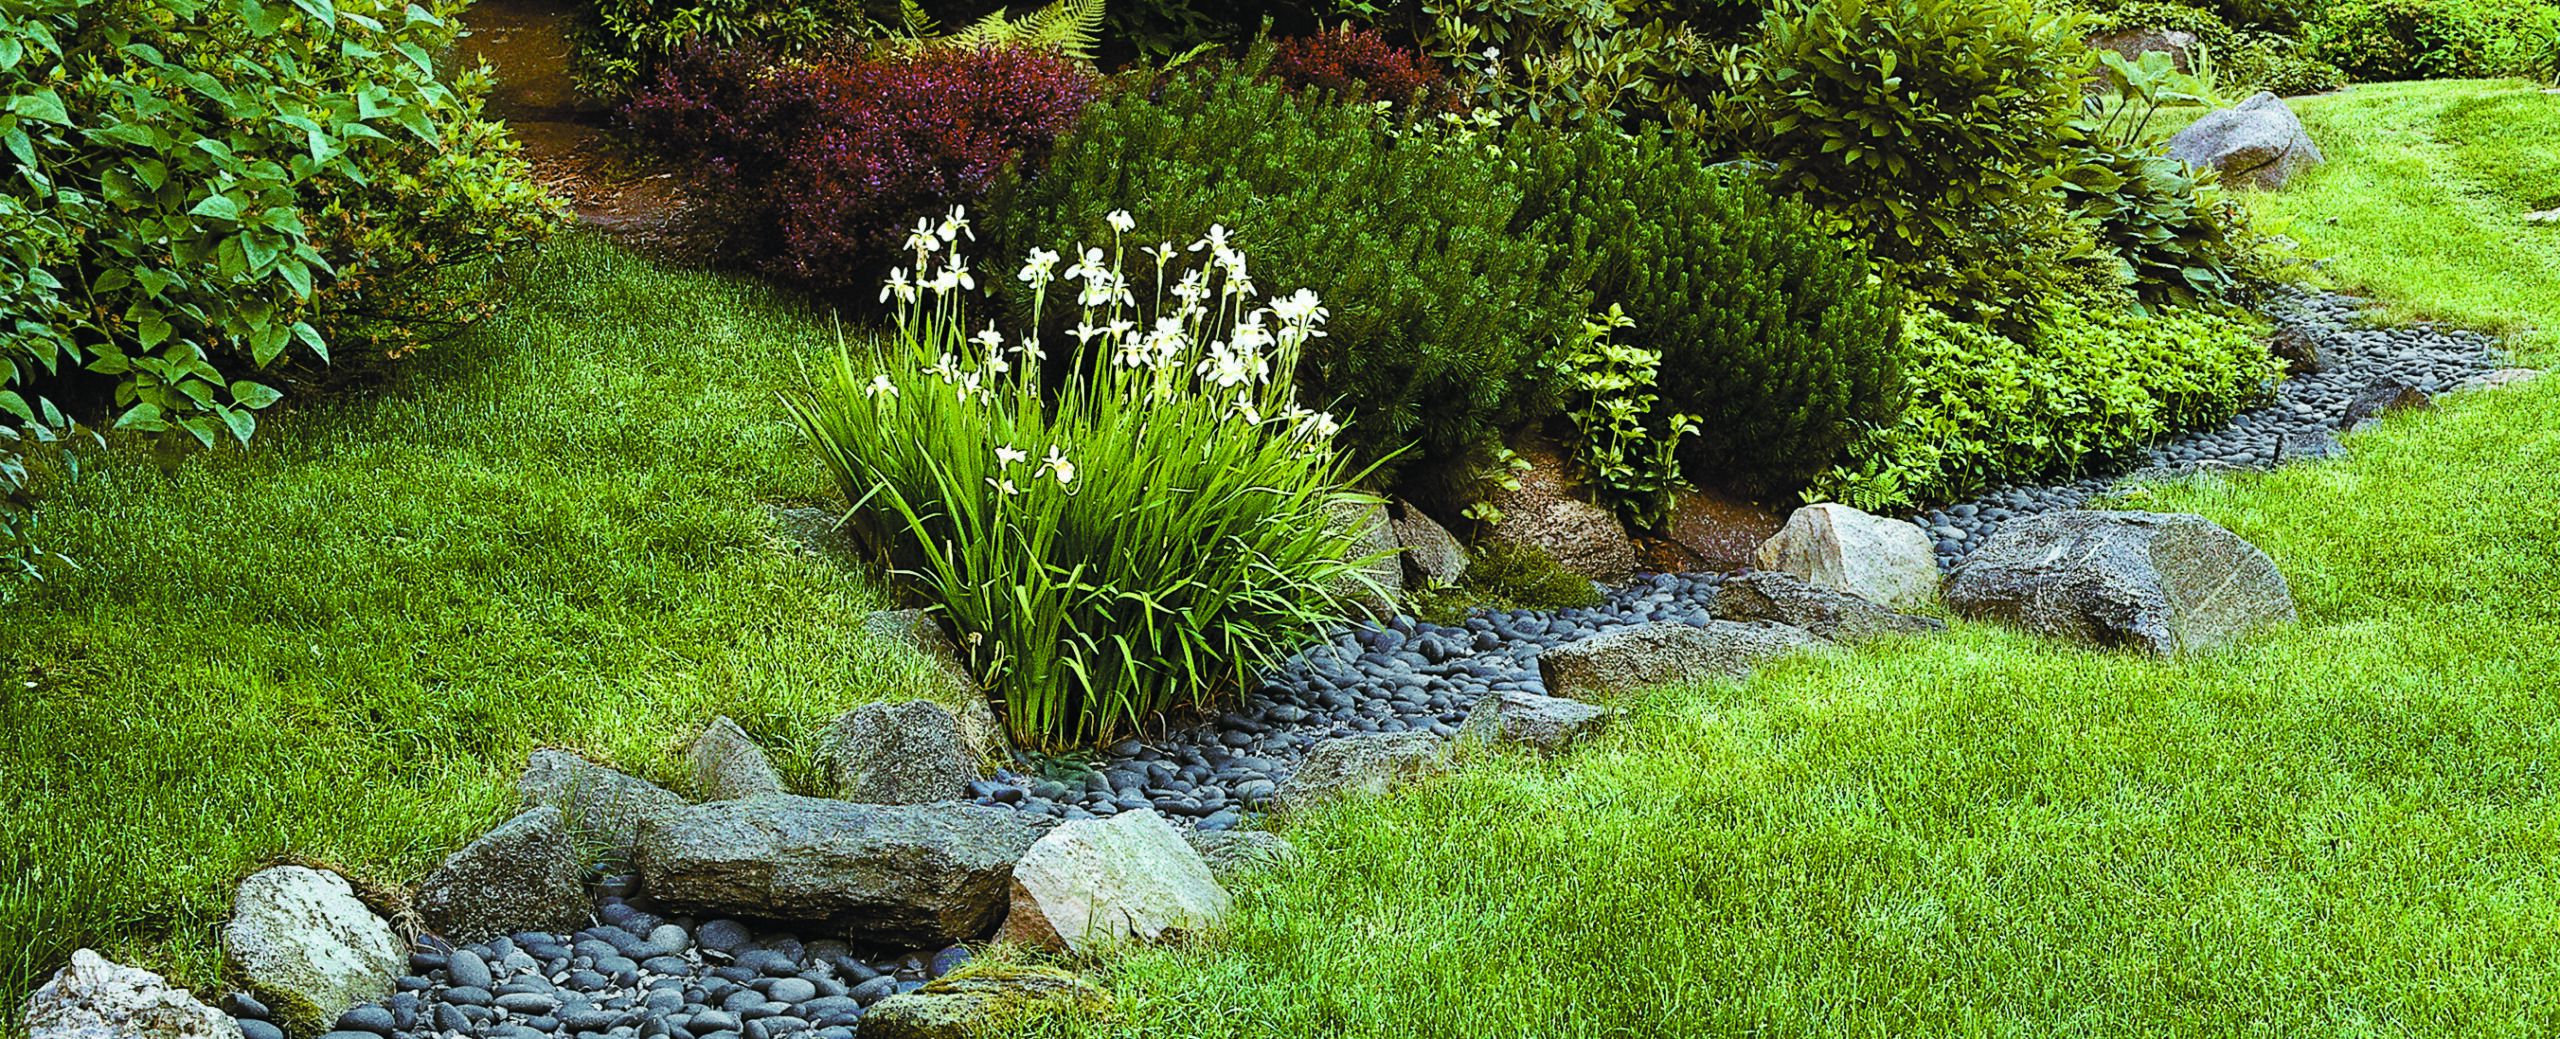 How To Use Landscaping To Deal With Storm Water - This Old House